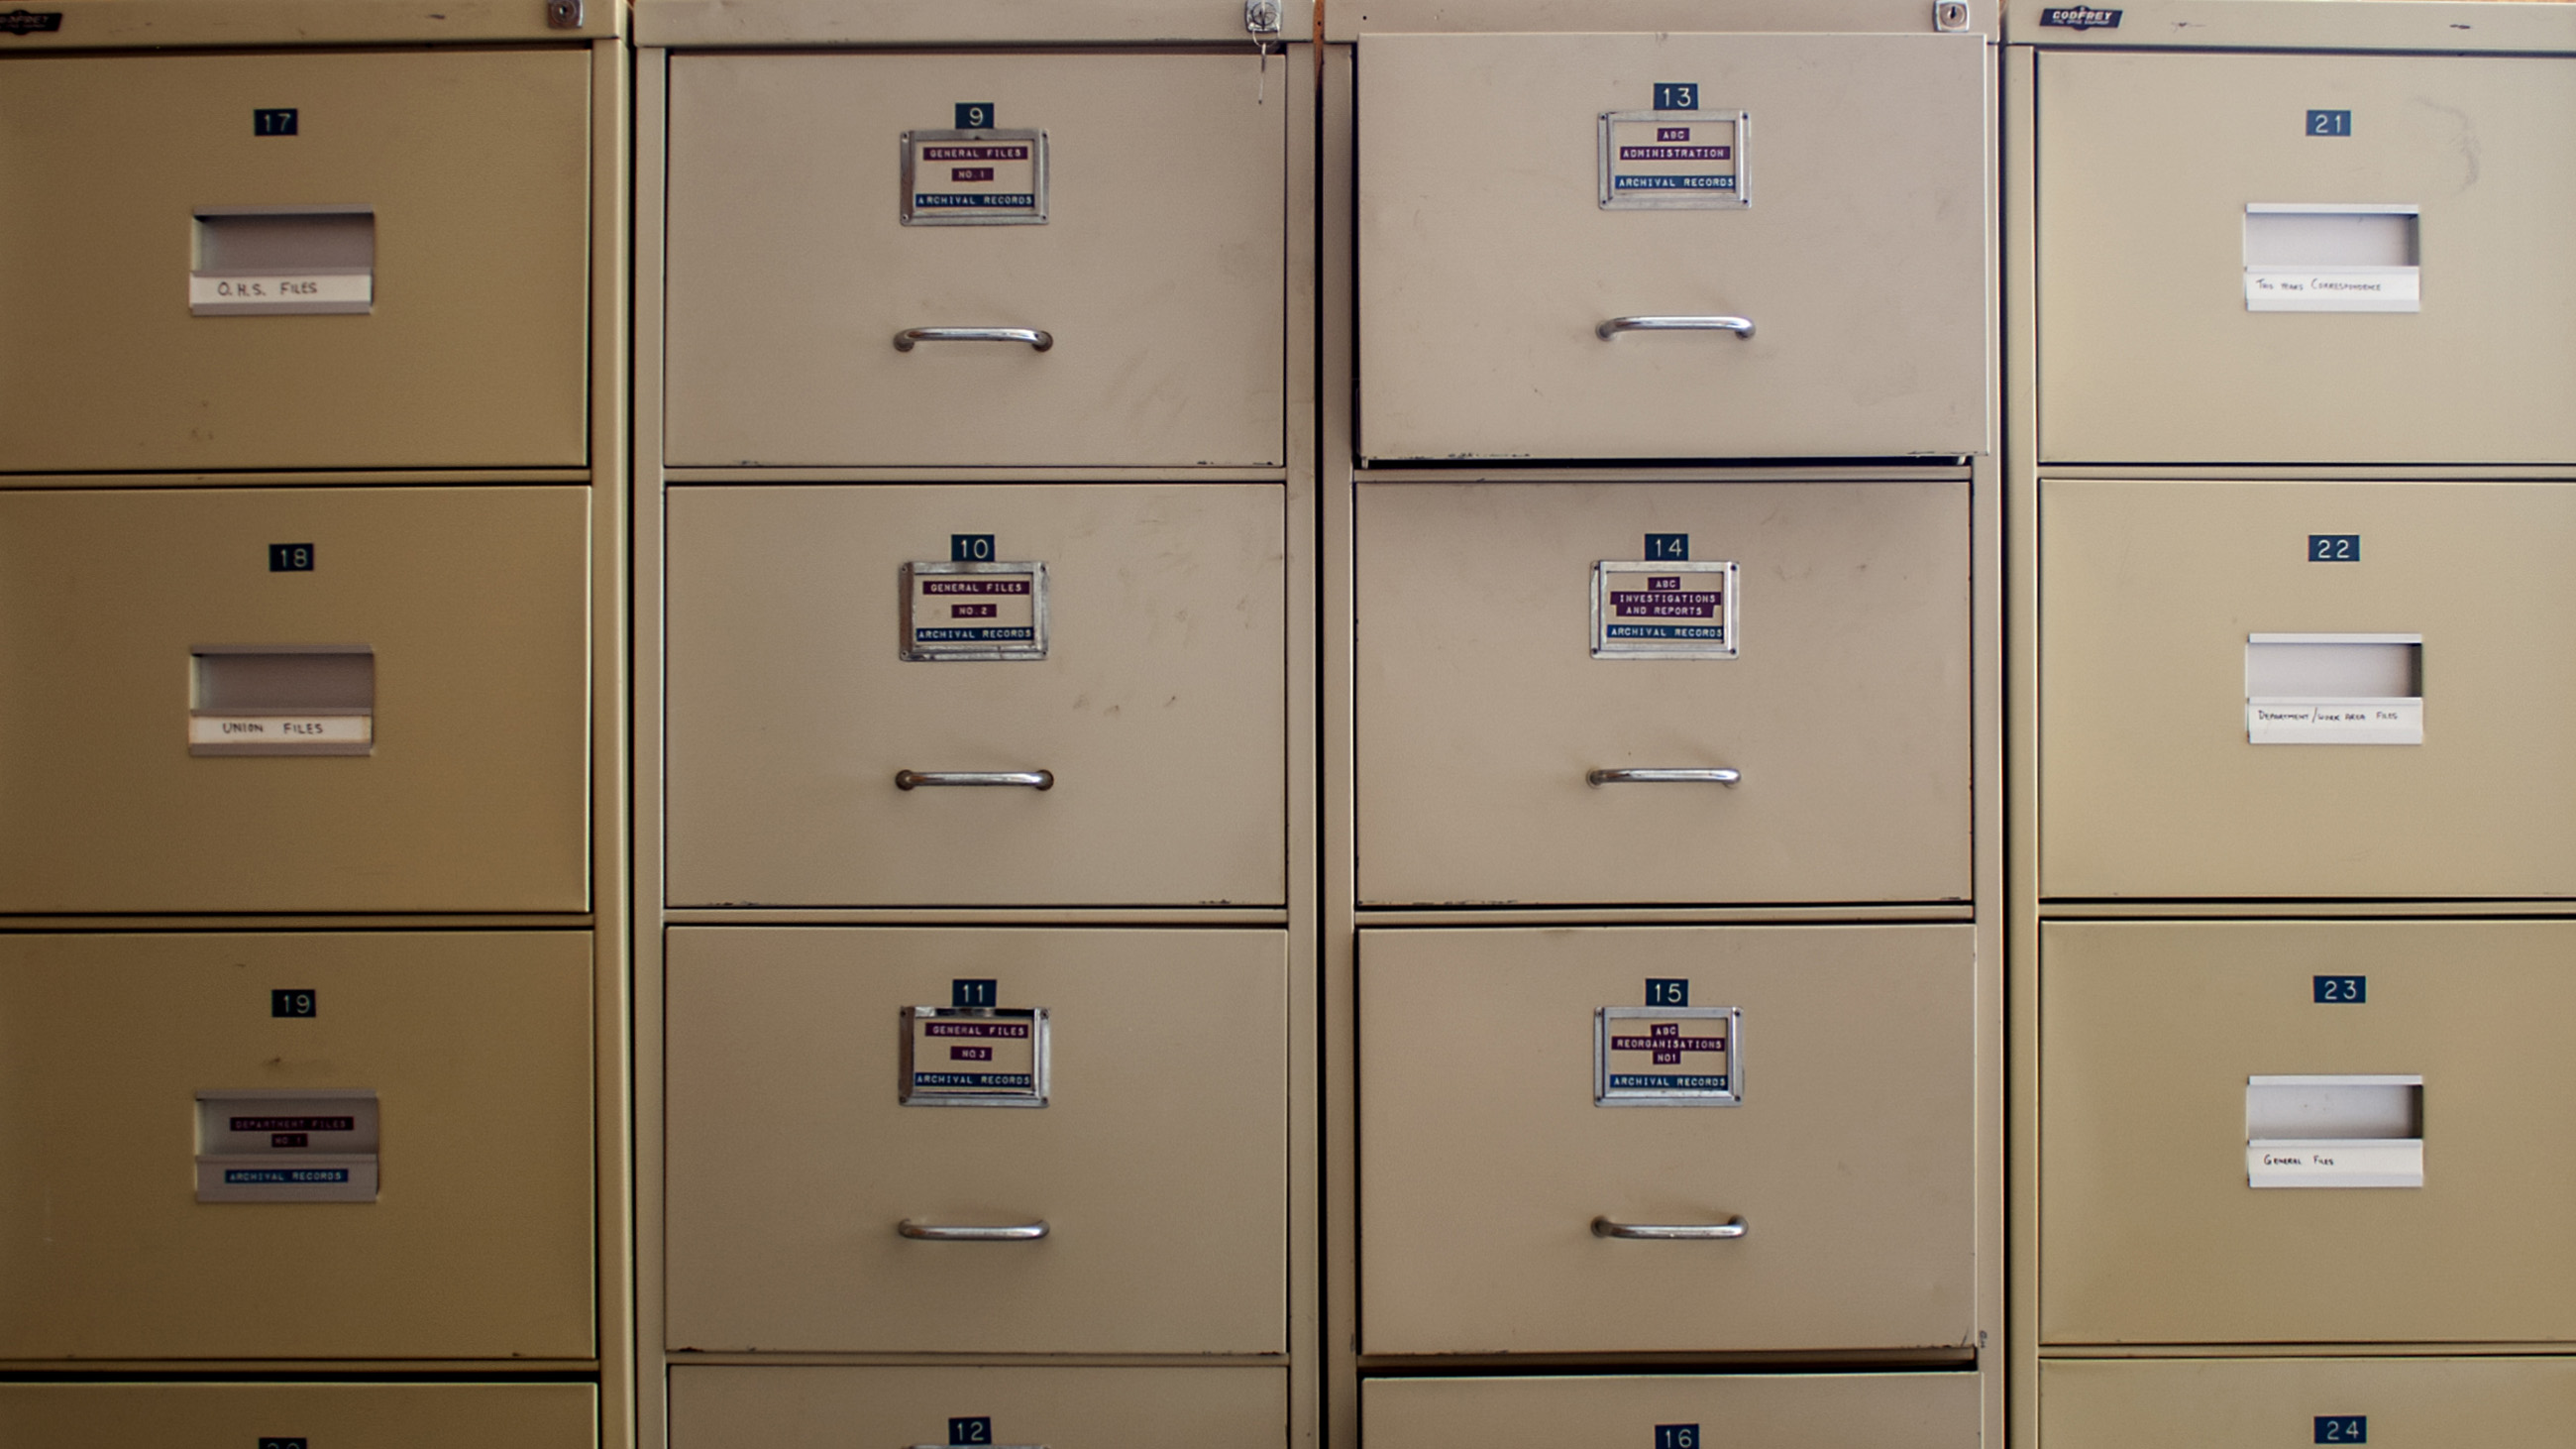 The file drawer problem is undermining psychology. It's time to fix it.